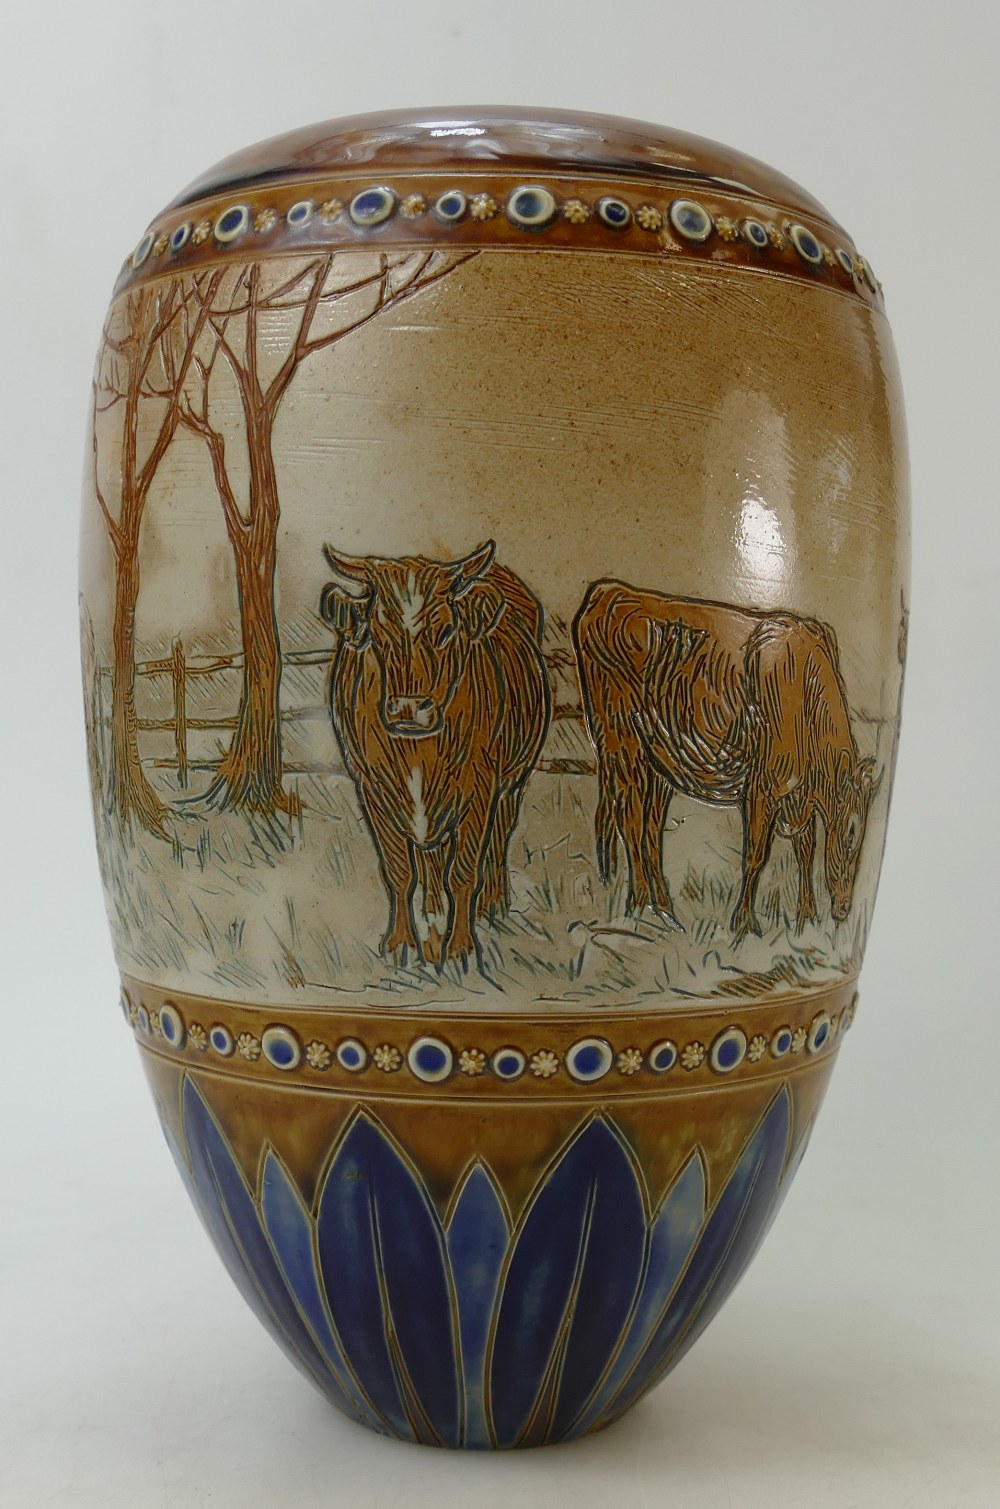 Royal Doulton Hannah Barlow vase: Vase by Royal Dolton decorated all around with cattle and donkeys - Image 4 of 5